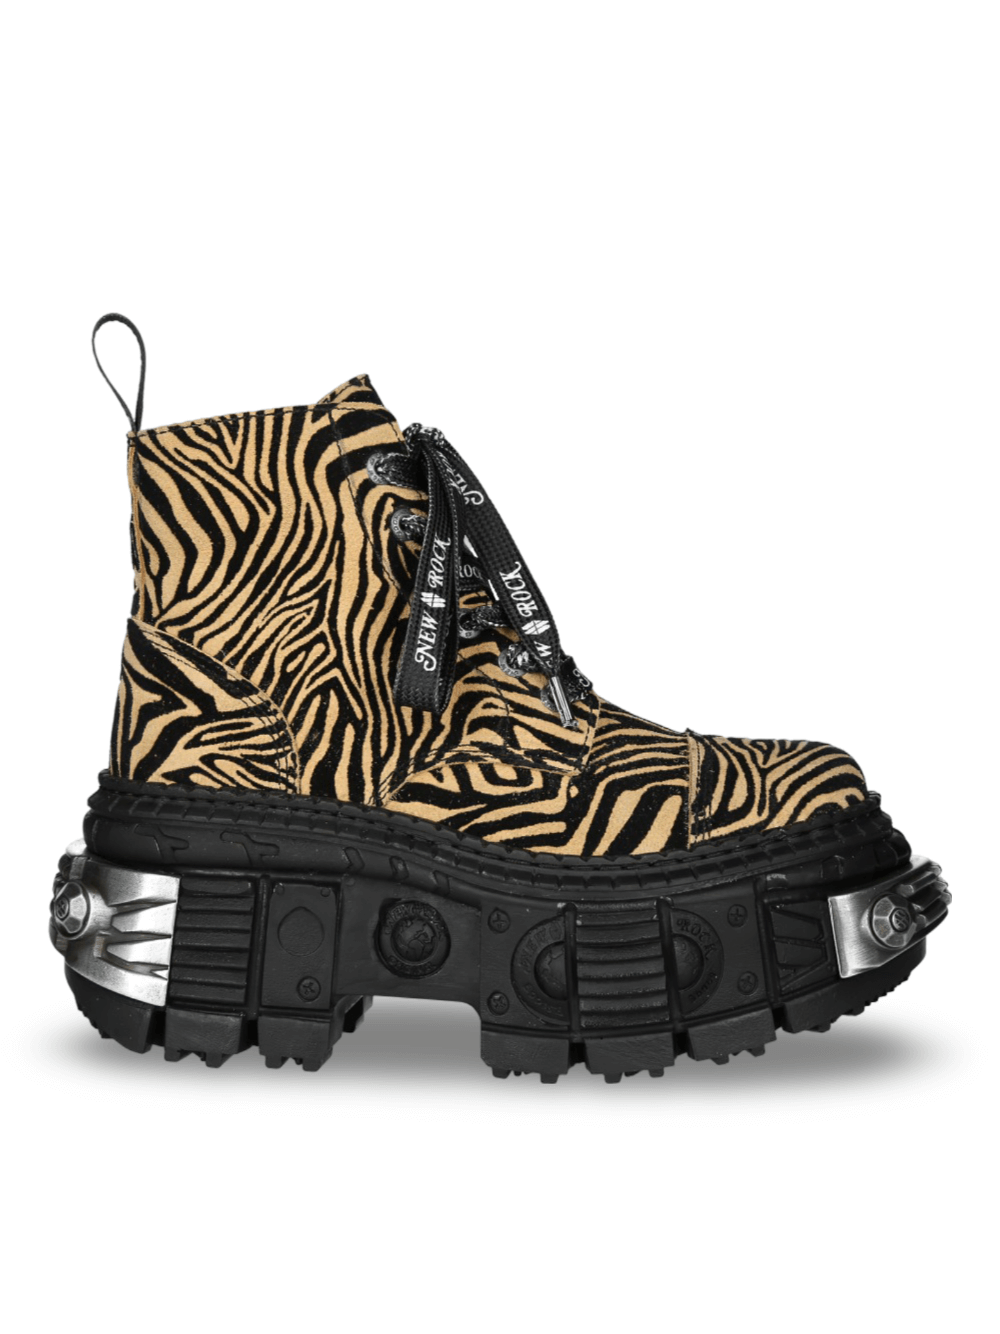 NEW ROCK Tiger Print Ankle Boots with Rugged Sole